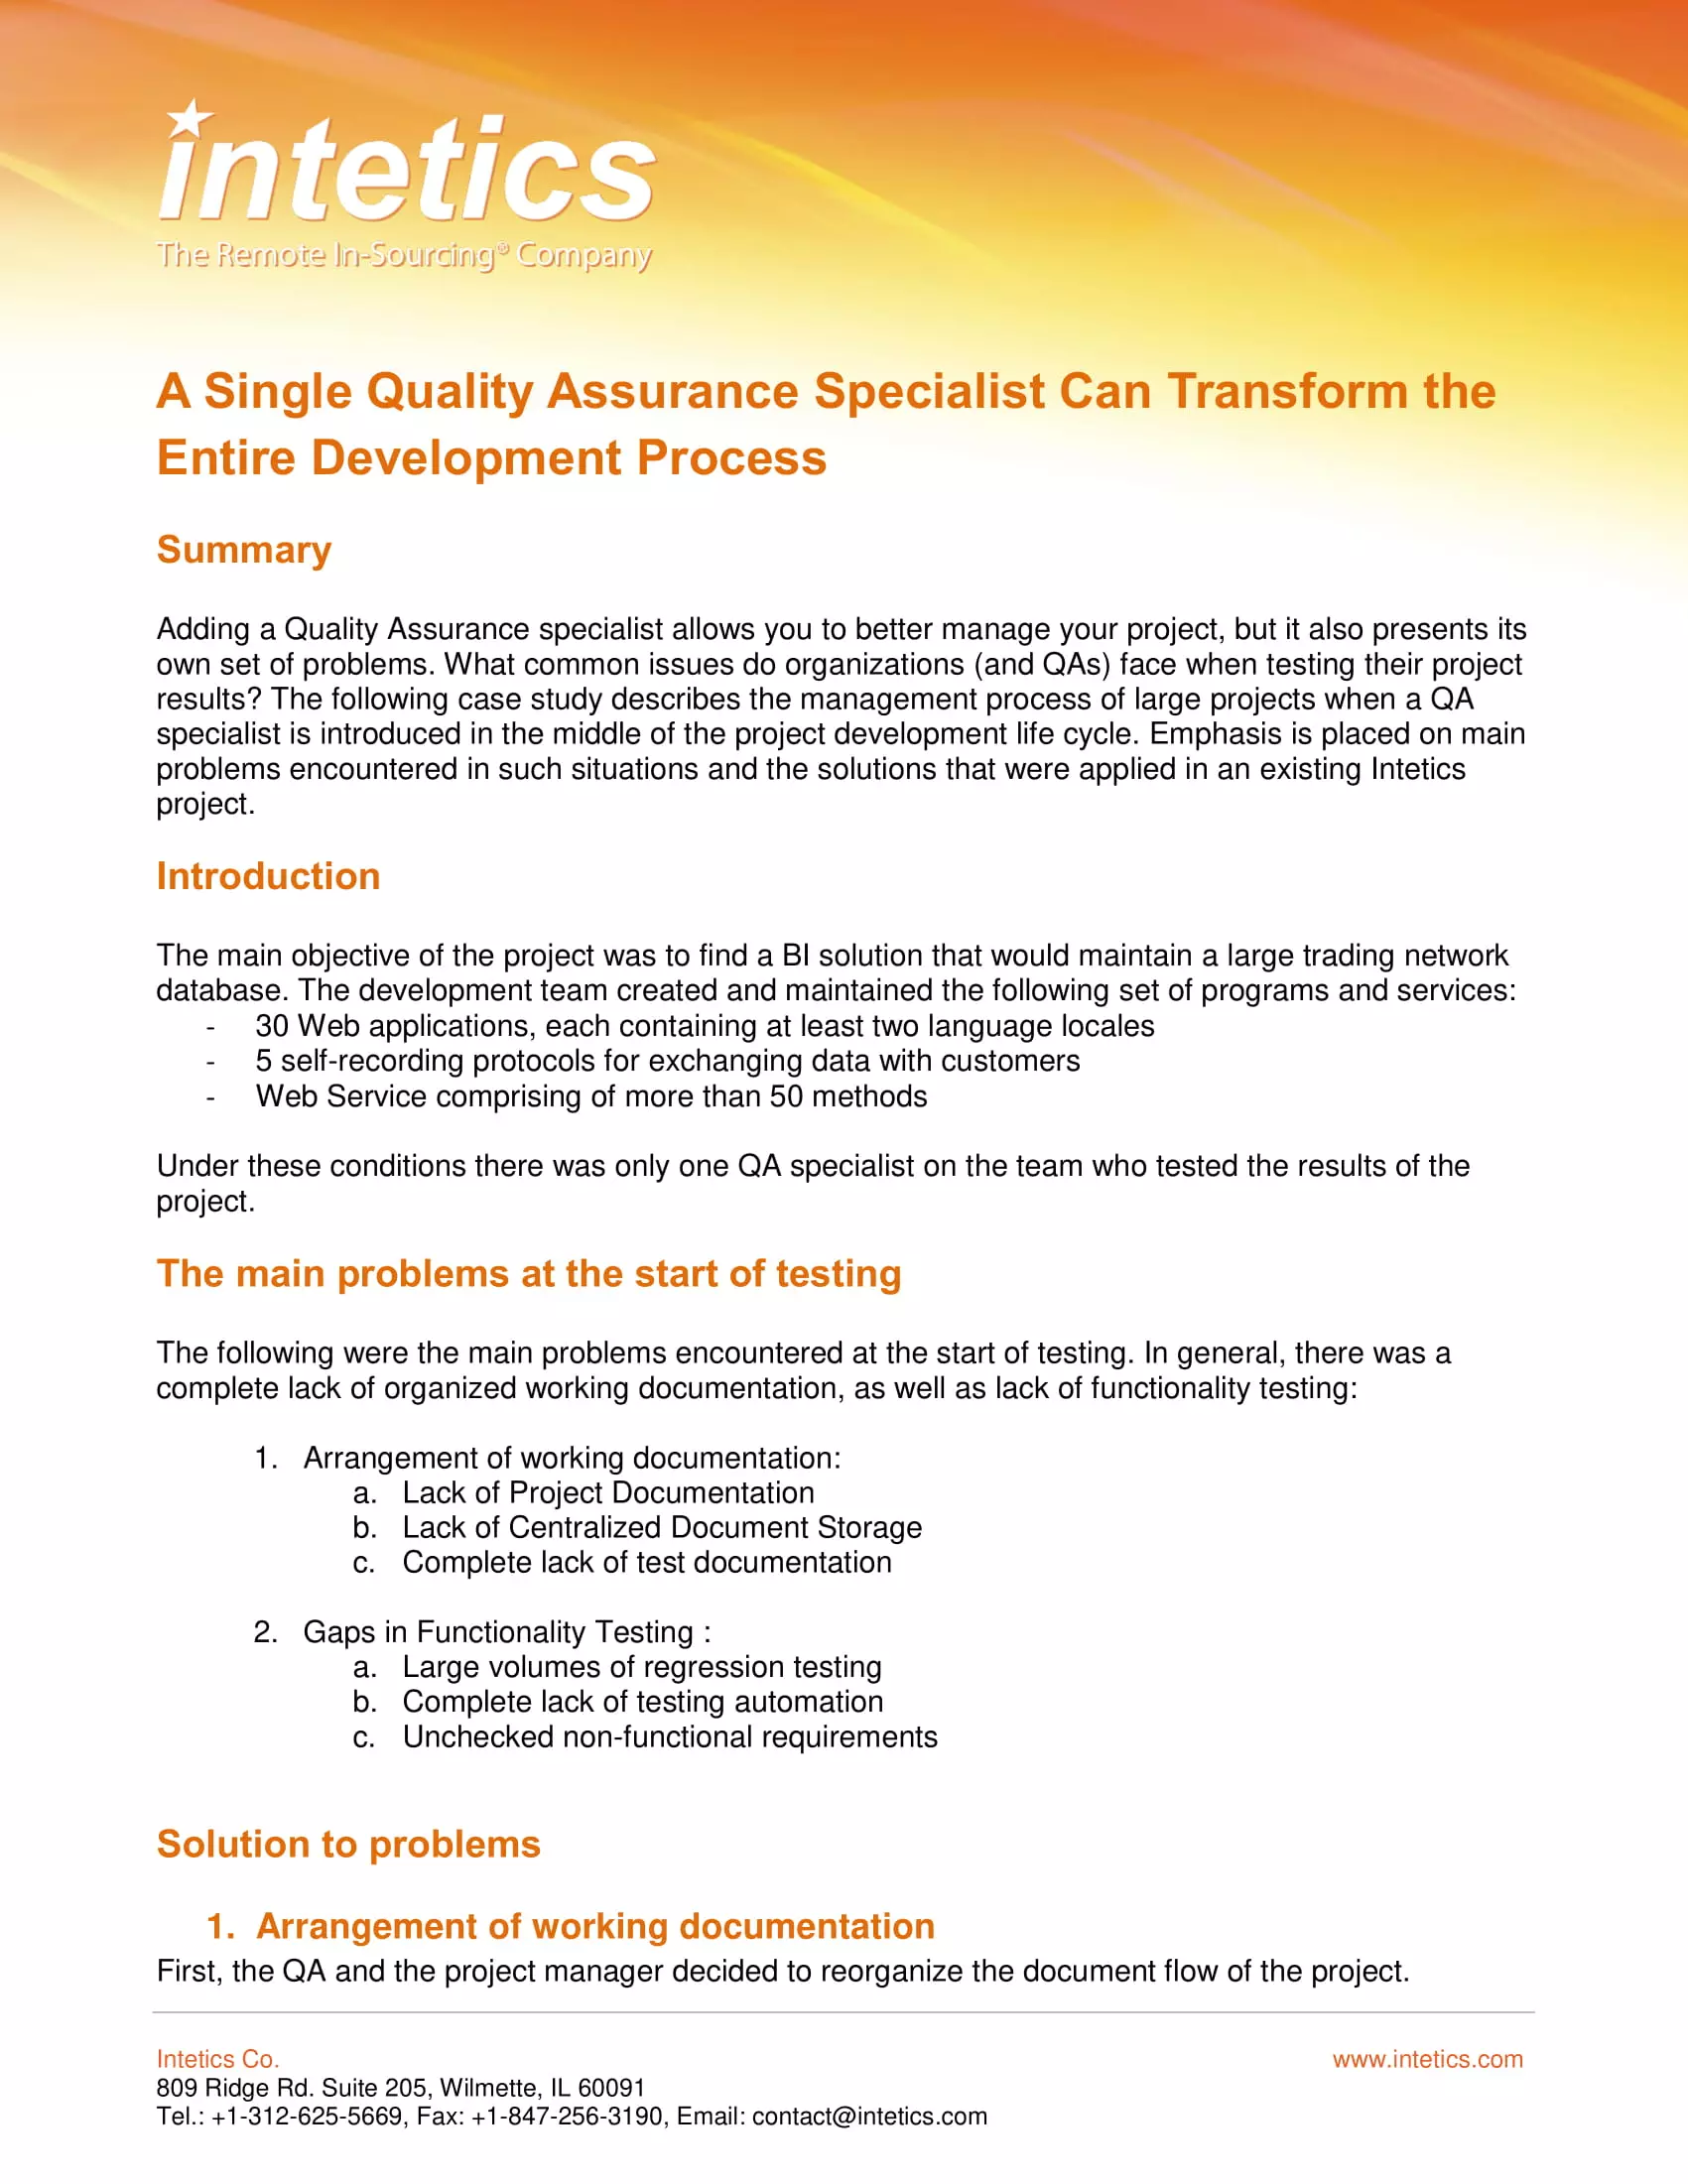 A-Single-Quality-Assurance-Specialist-Can-Transform-the-Entire-Development-Process-1